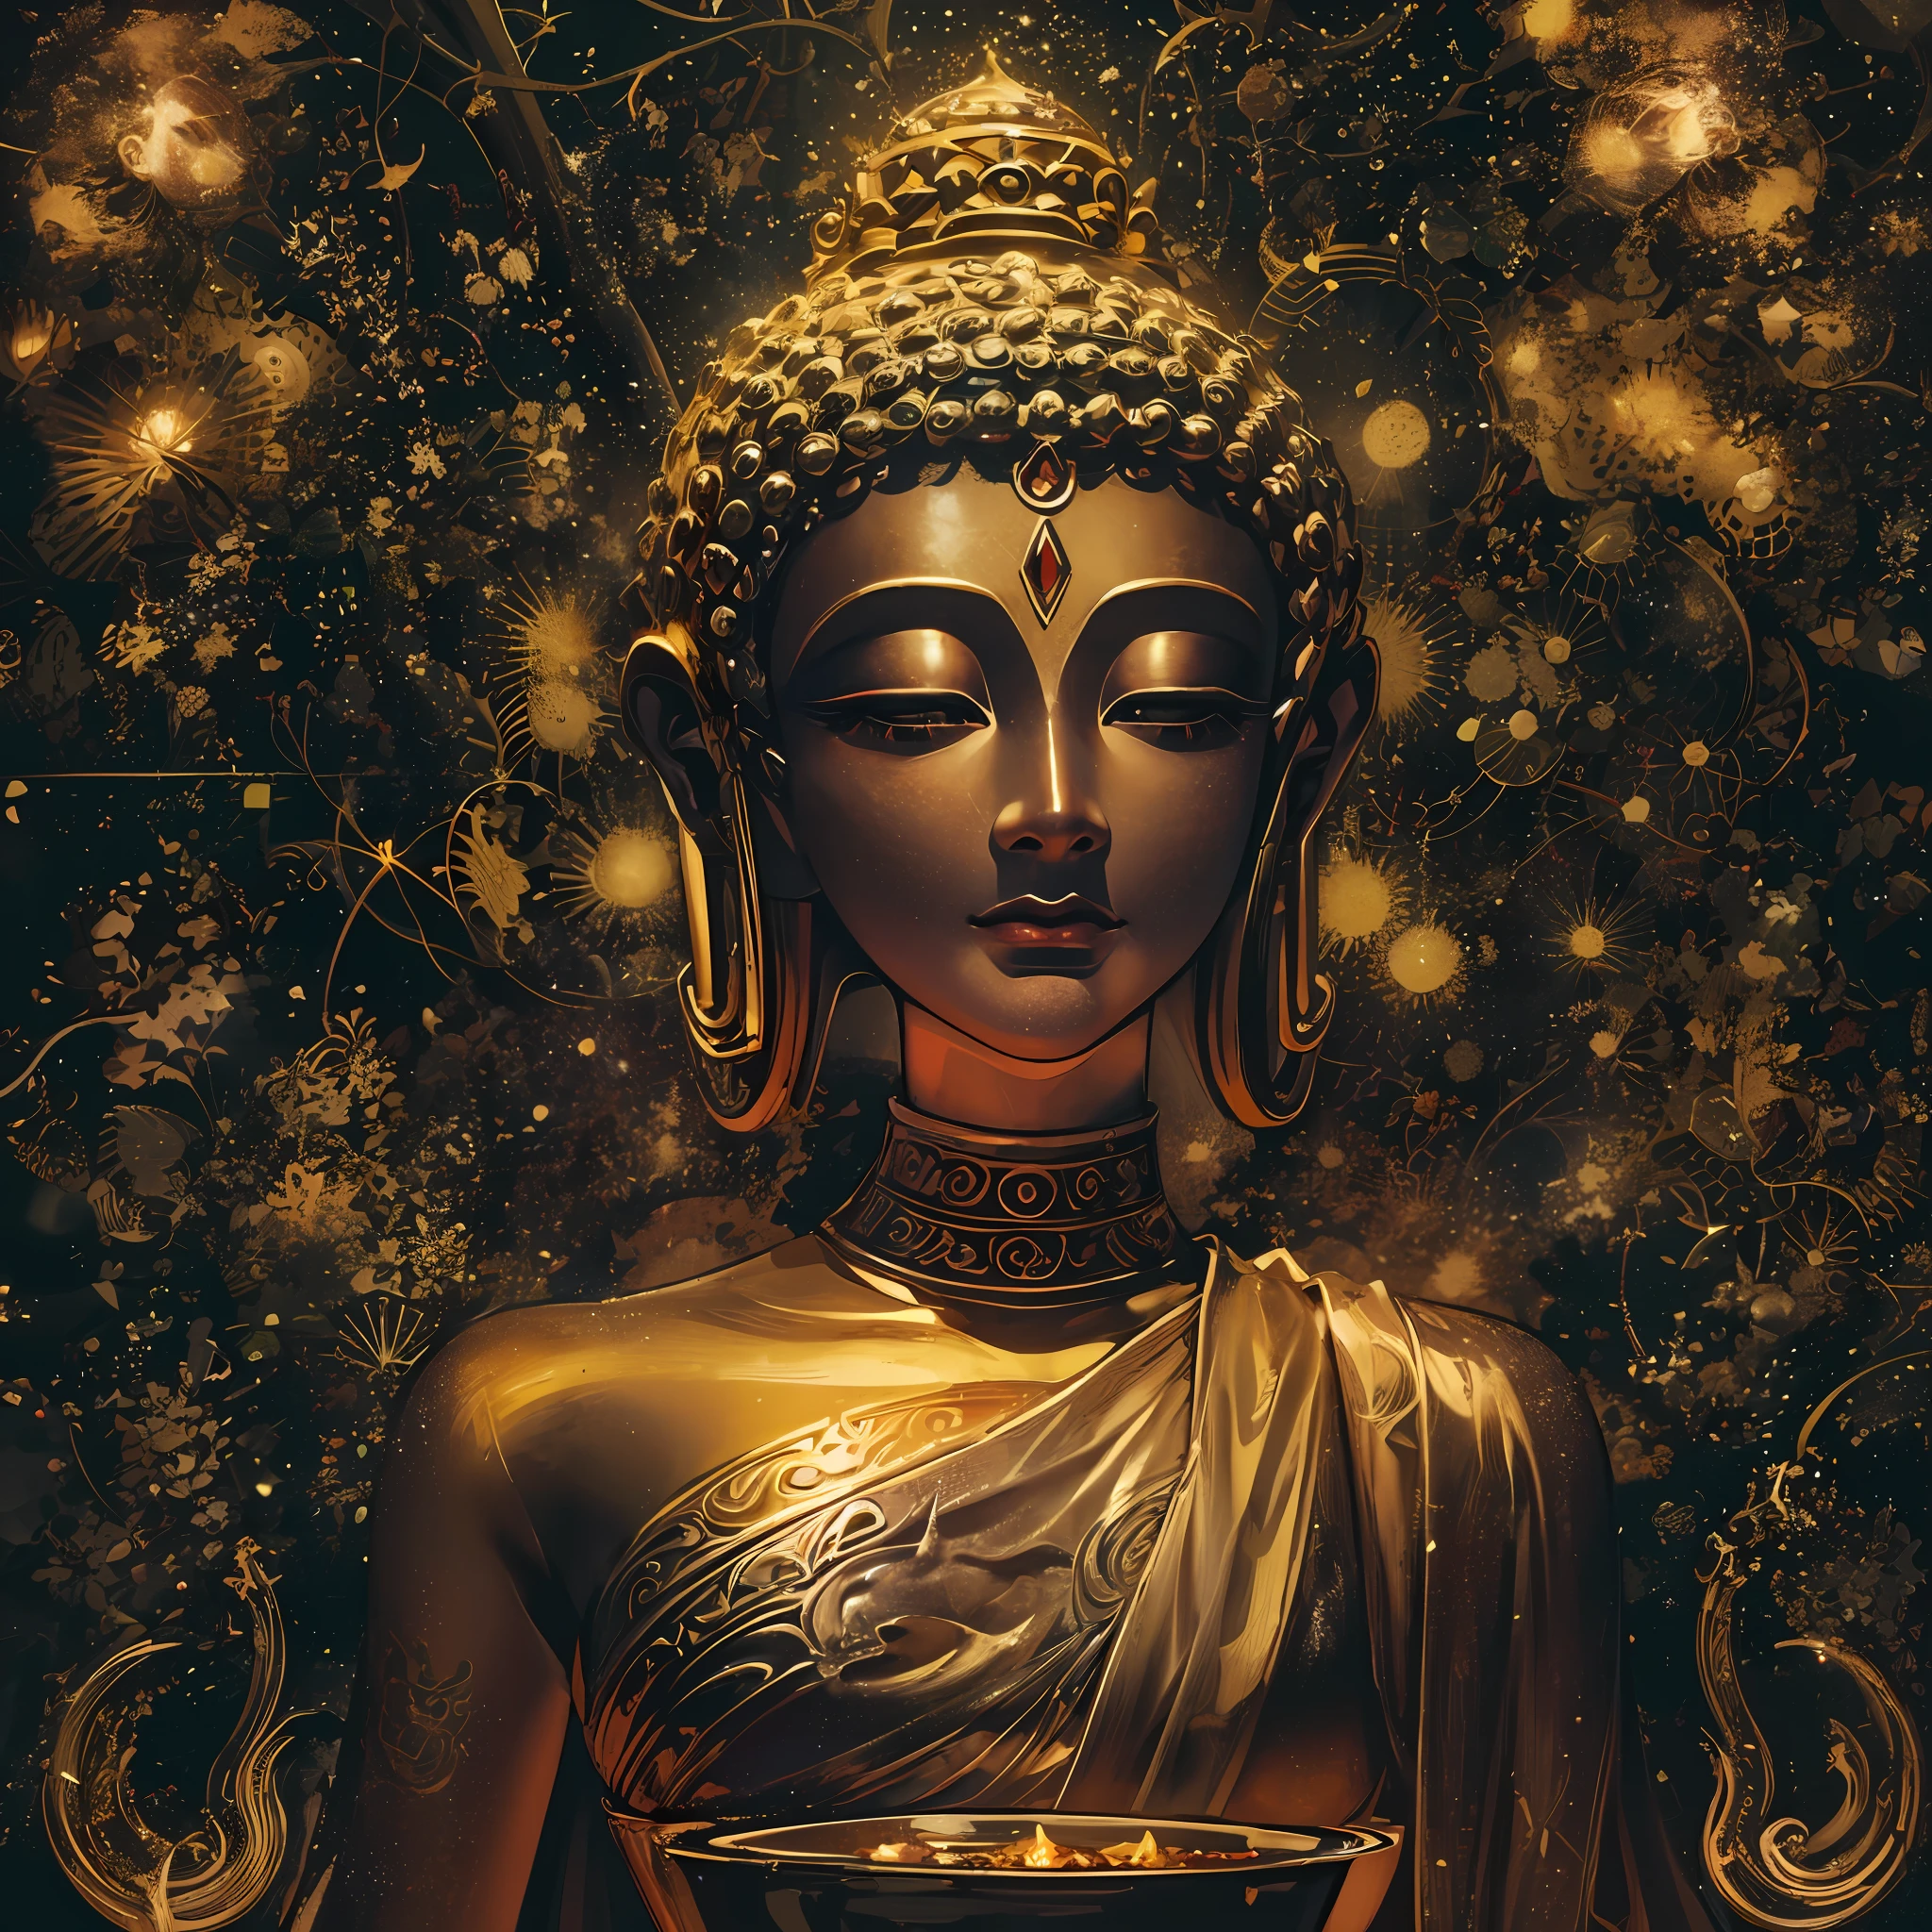 A golden female Buddha statue, frontal portrait, with a censer in front, against a background of the dark cosmos, Photo taken with Sony a7R camera, taken with sigma 20mm f1.4, Beautiful image, surrealism, Cinematic lighting, god light, back lit lighting, Textured skin, Super detail,